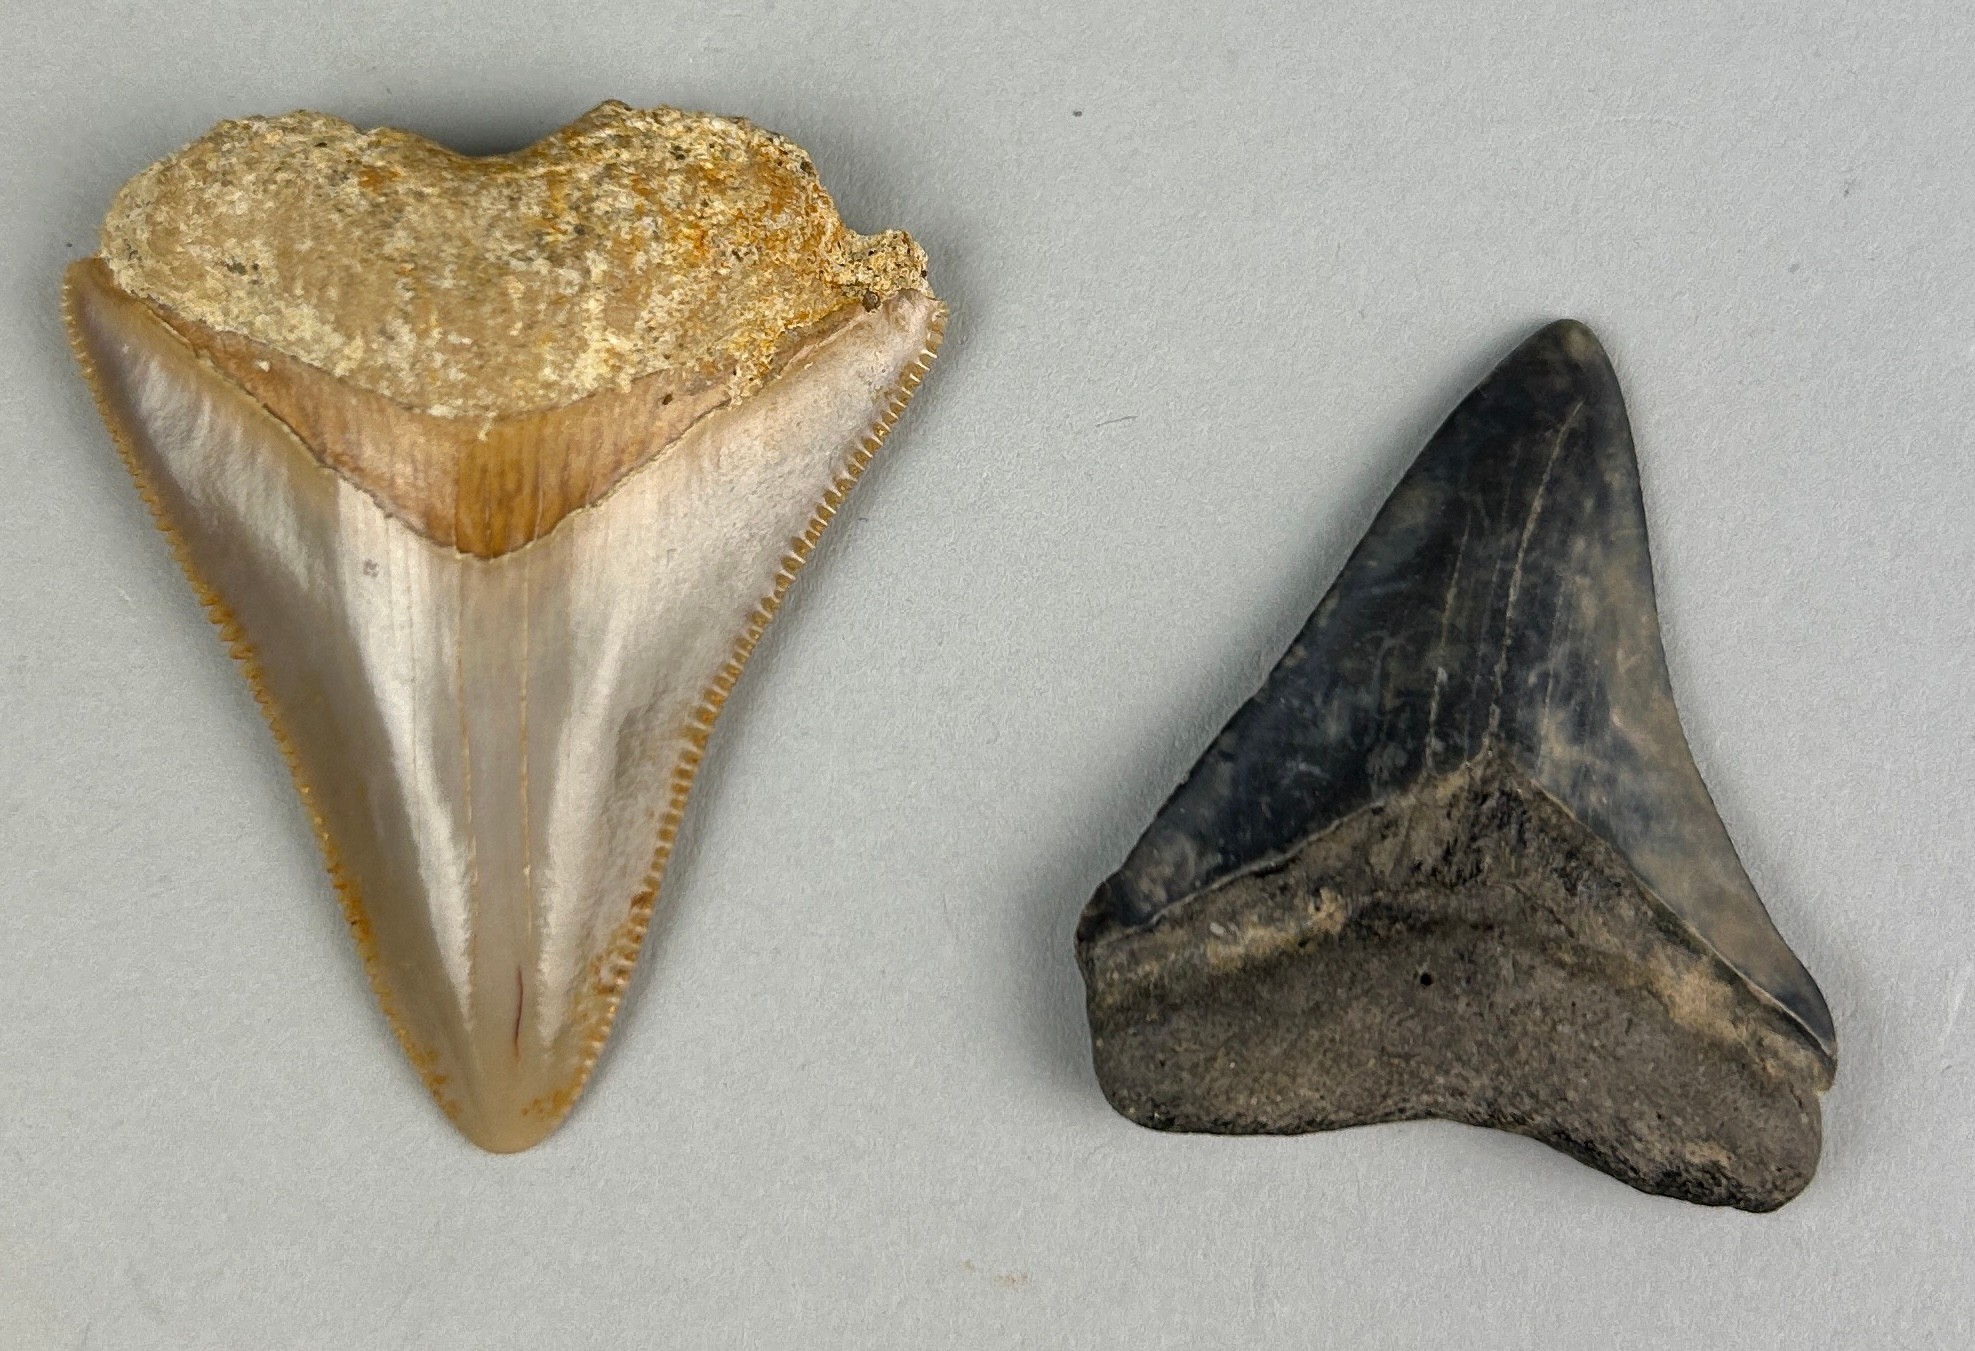 A PAIR OF JUVENILE MEGALODON FOSSIL TEETH, Largest 4.3cm x 4cm A pair of teeth from the extinct